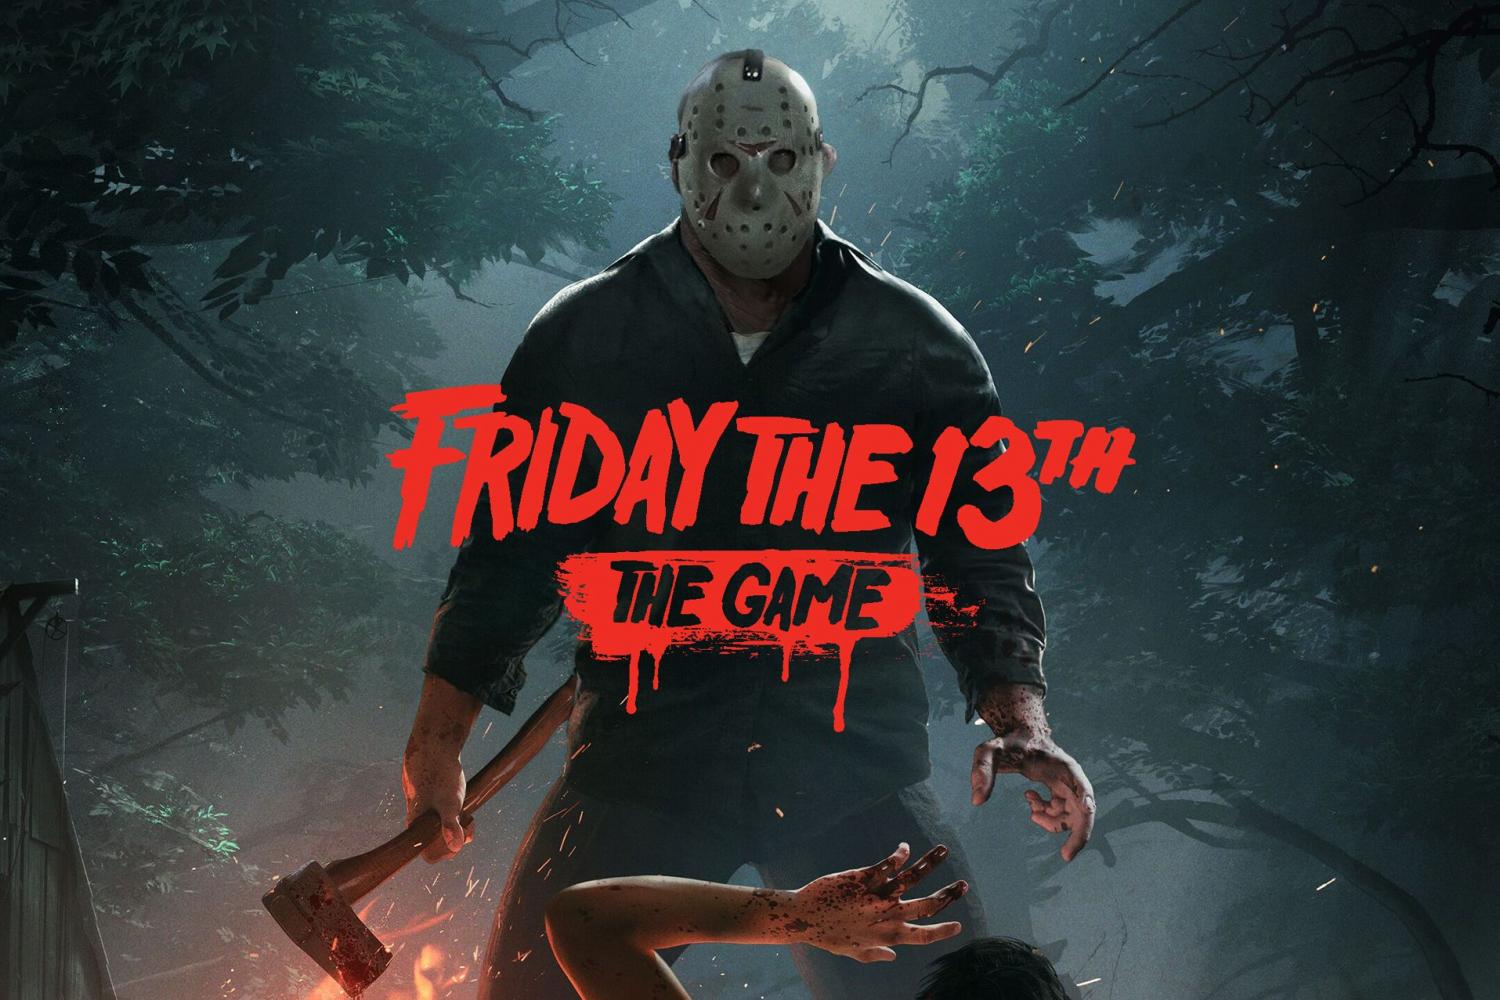 Friday The 13th: The Game